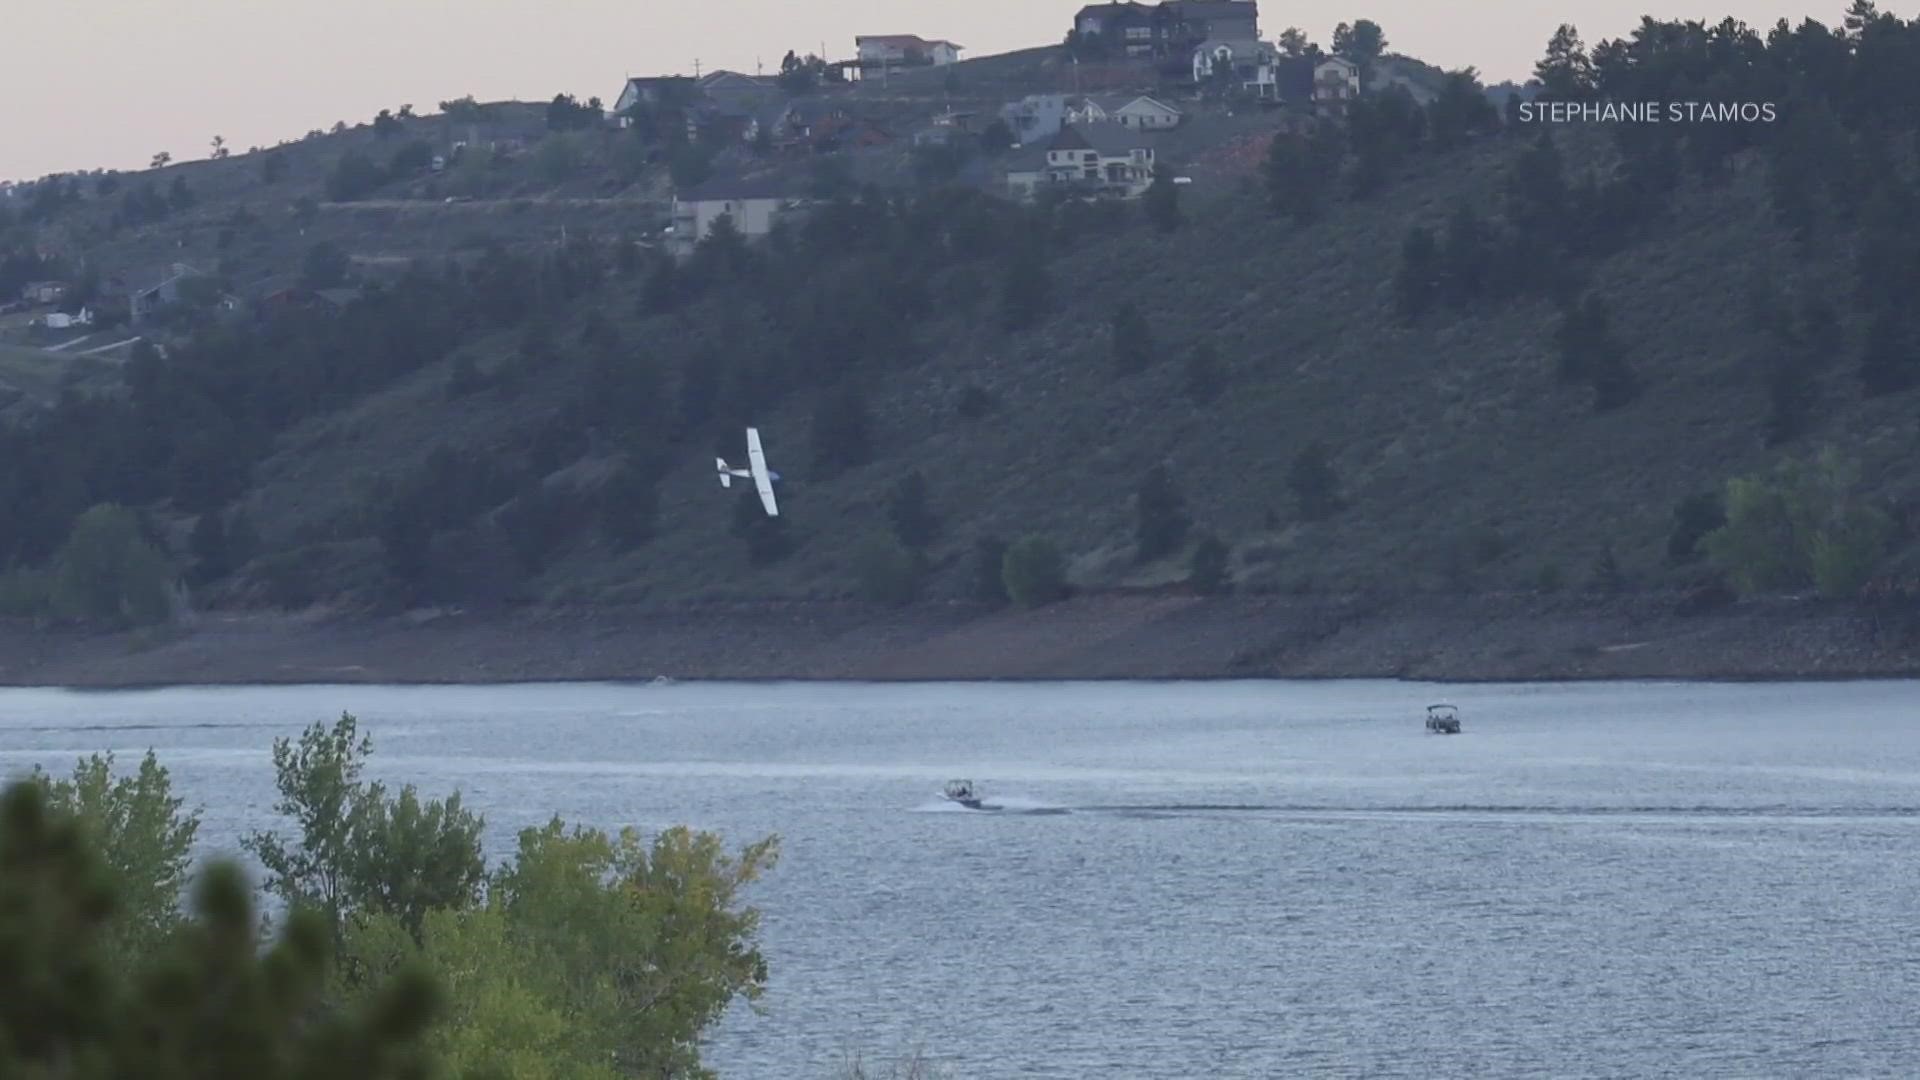 Authorities said the pilot left the U.S. shortly after the crash and has not returned.